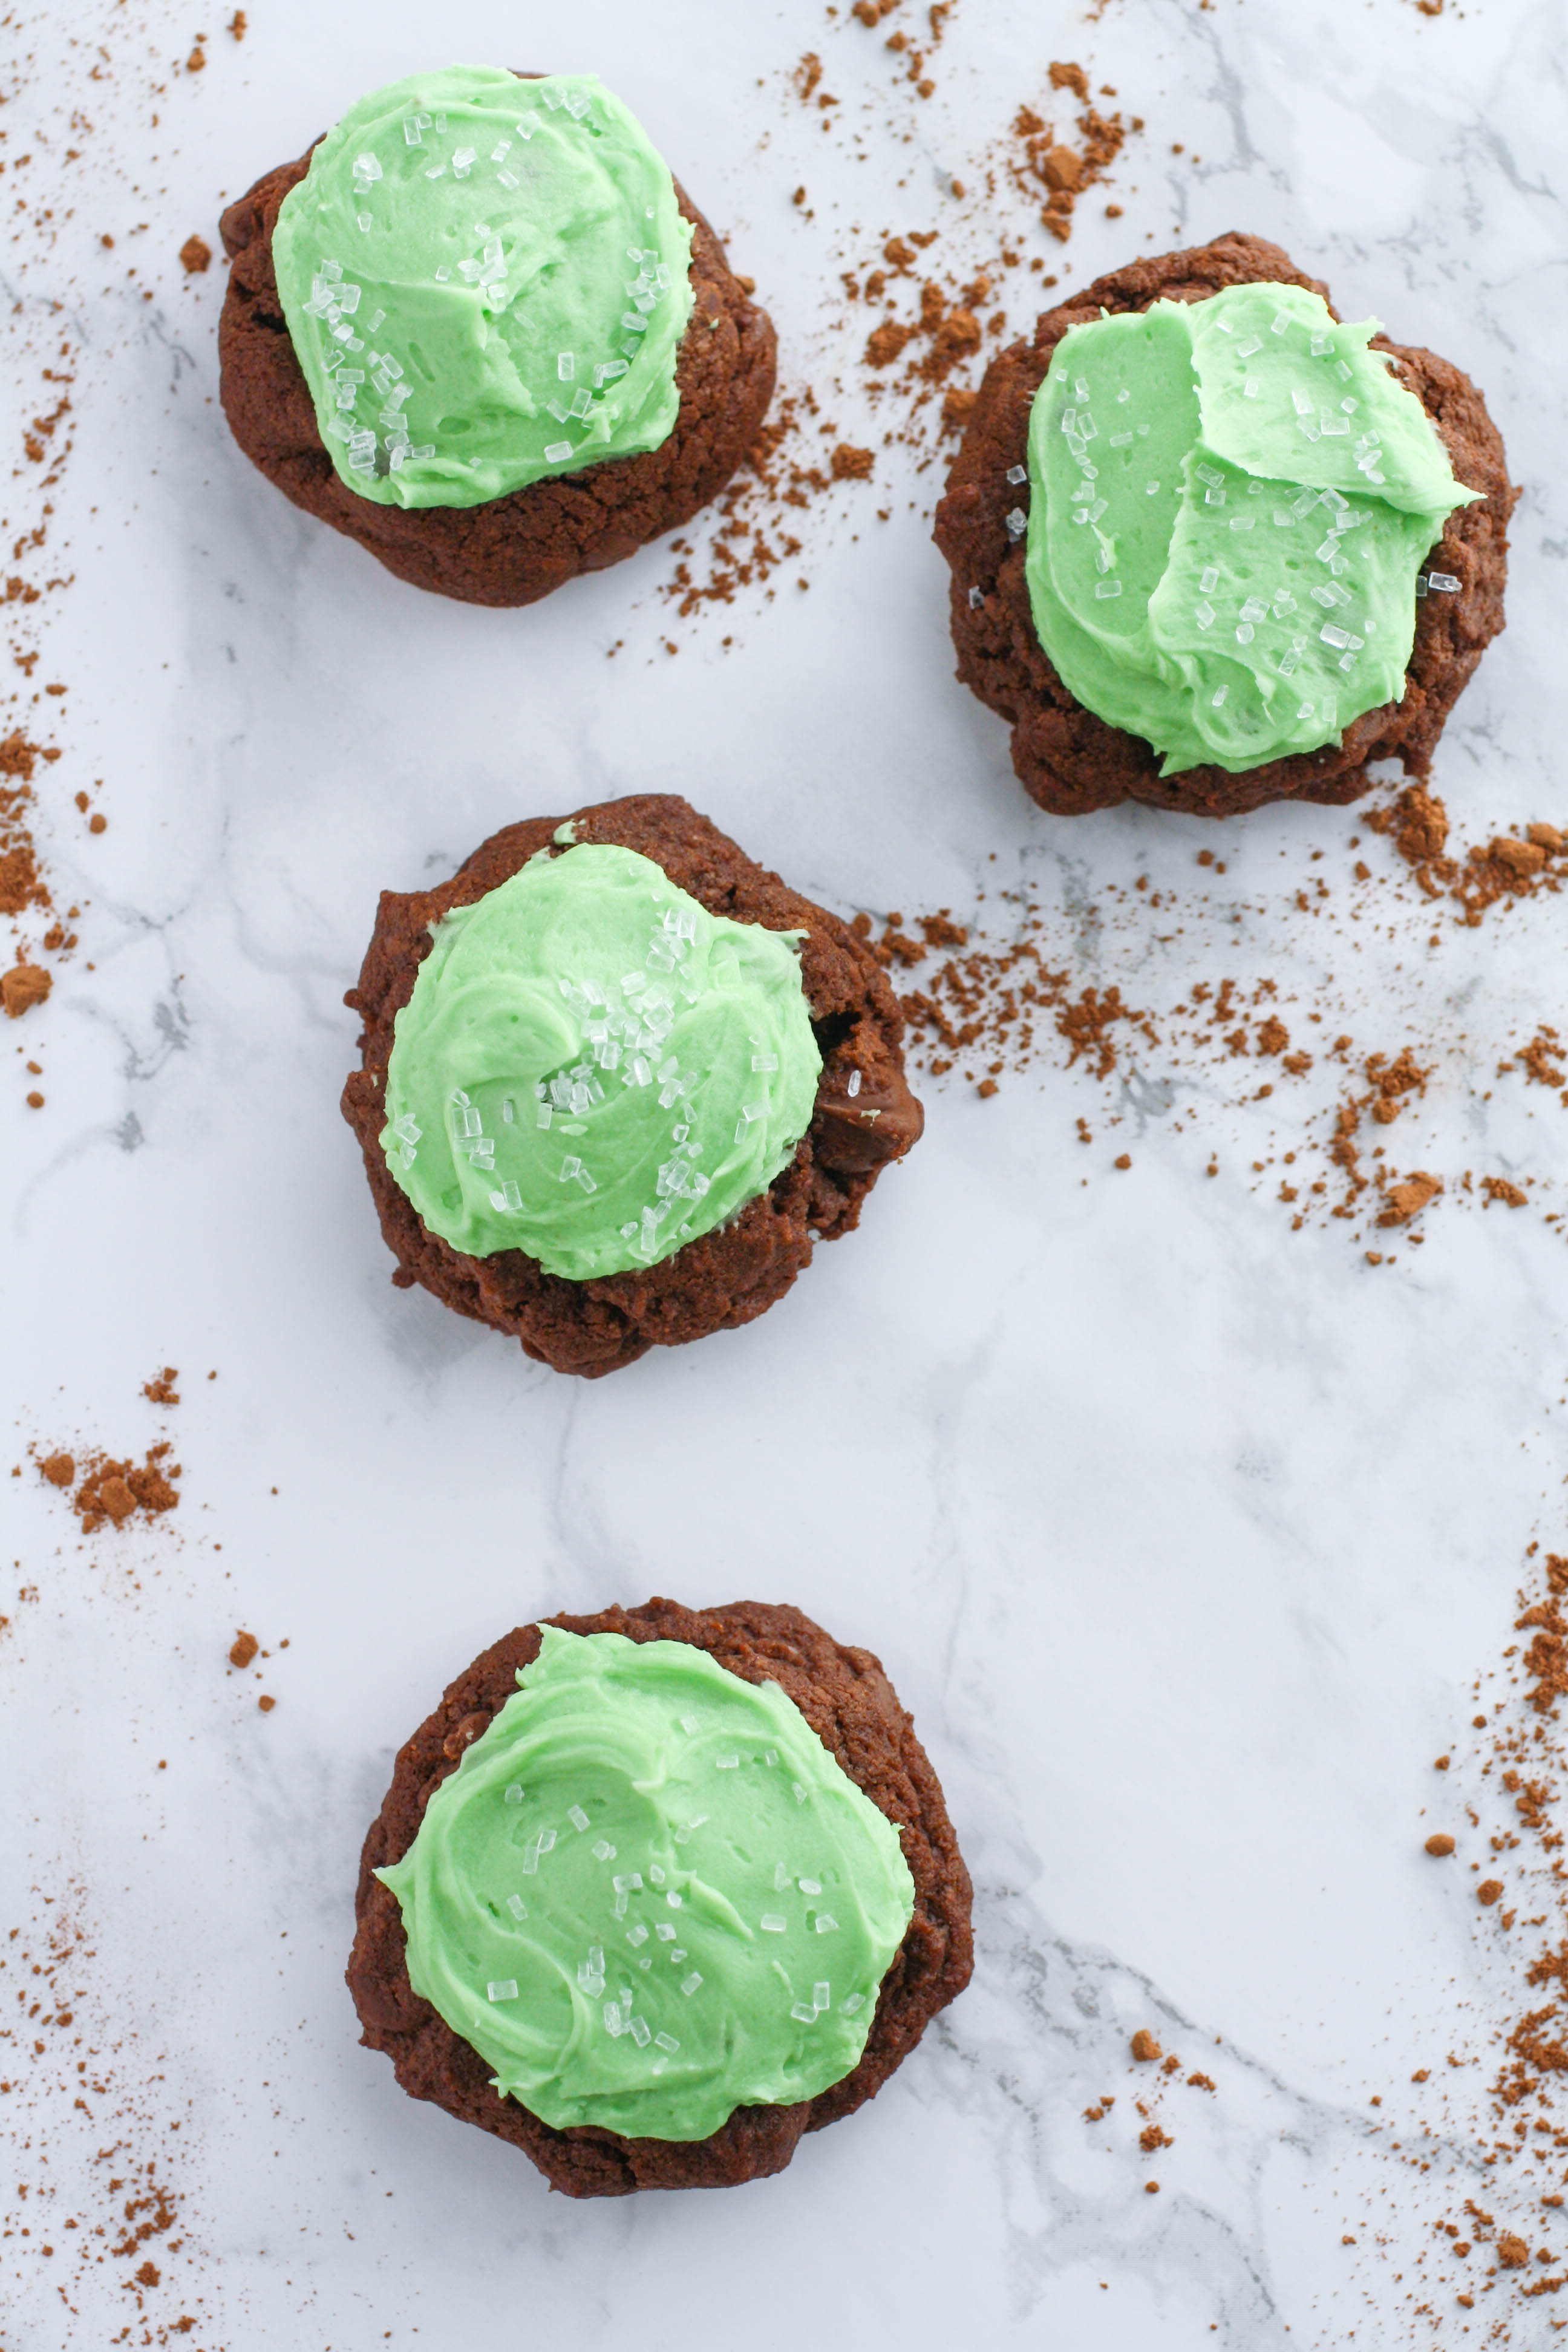 Double Chocolate Cookies with Baileys Buttercream Frosting are delicious treats! Why not enjoy Double Chocolate Cookies with Baileys Buttercream Frosting for St. Patrick's Day?